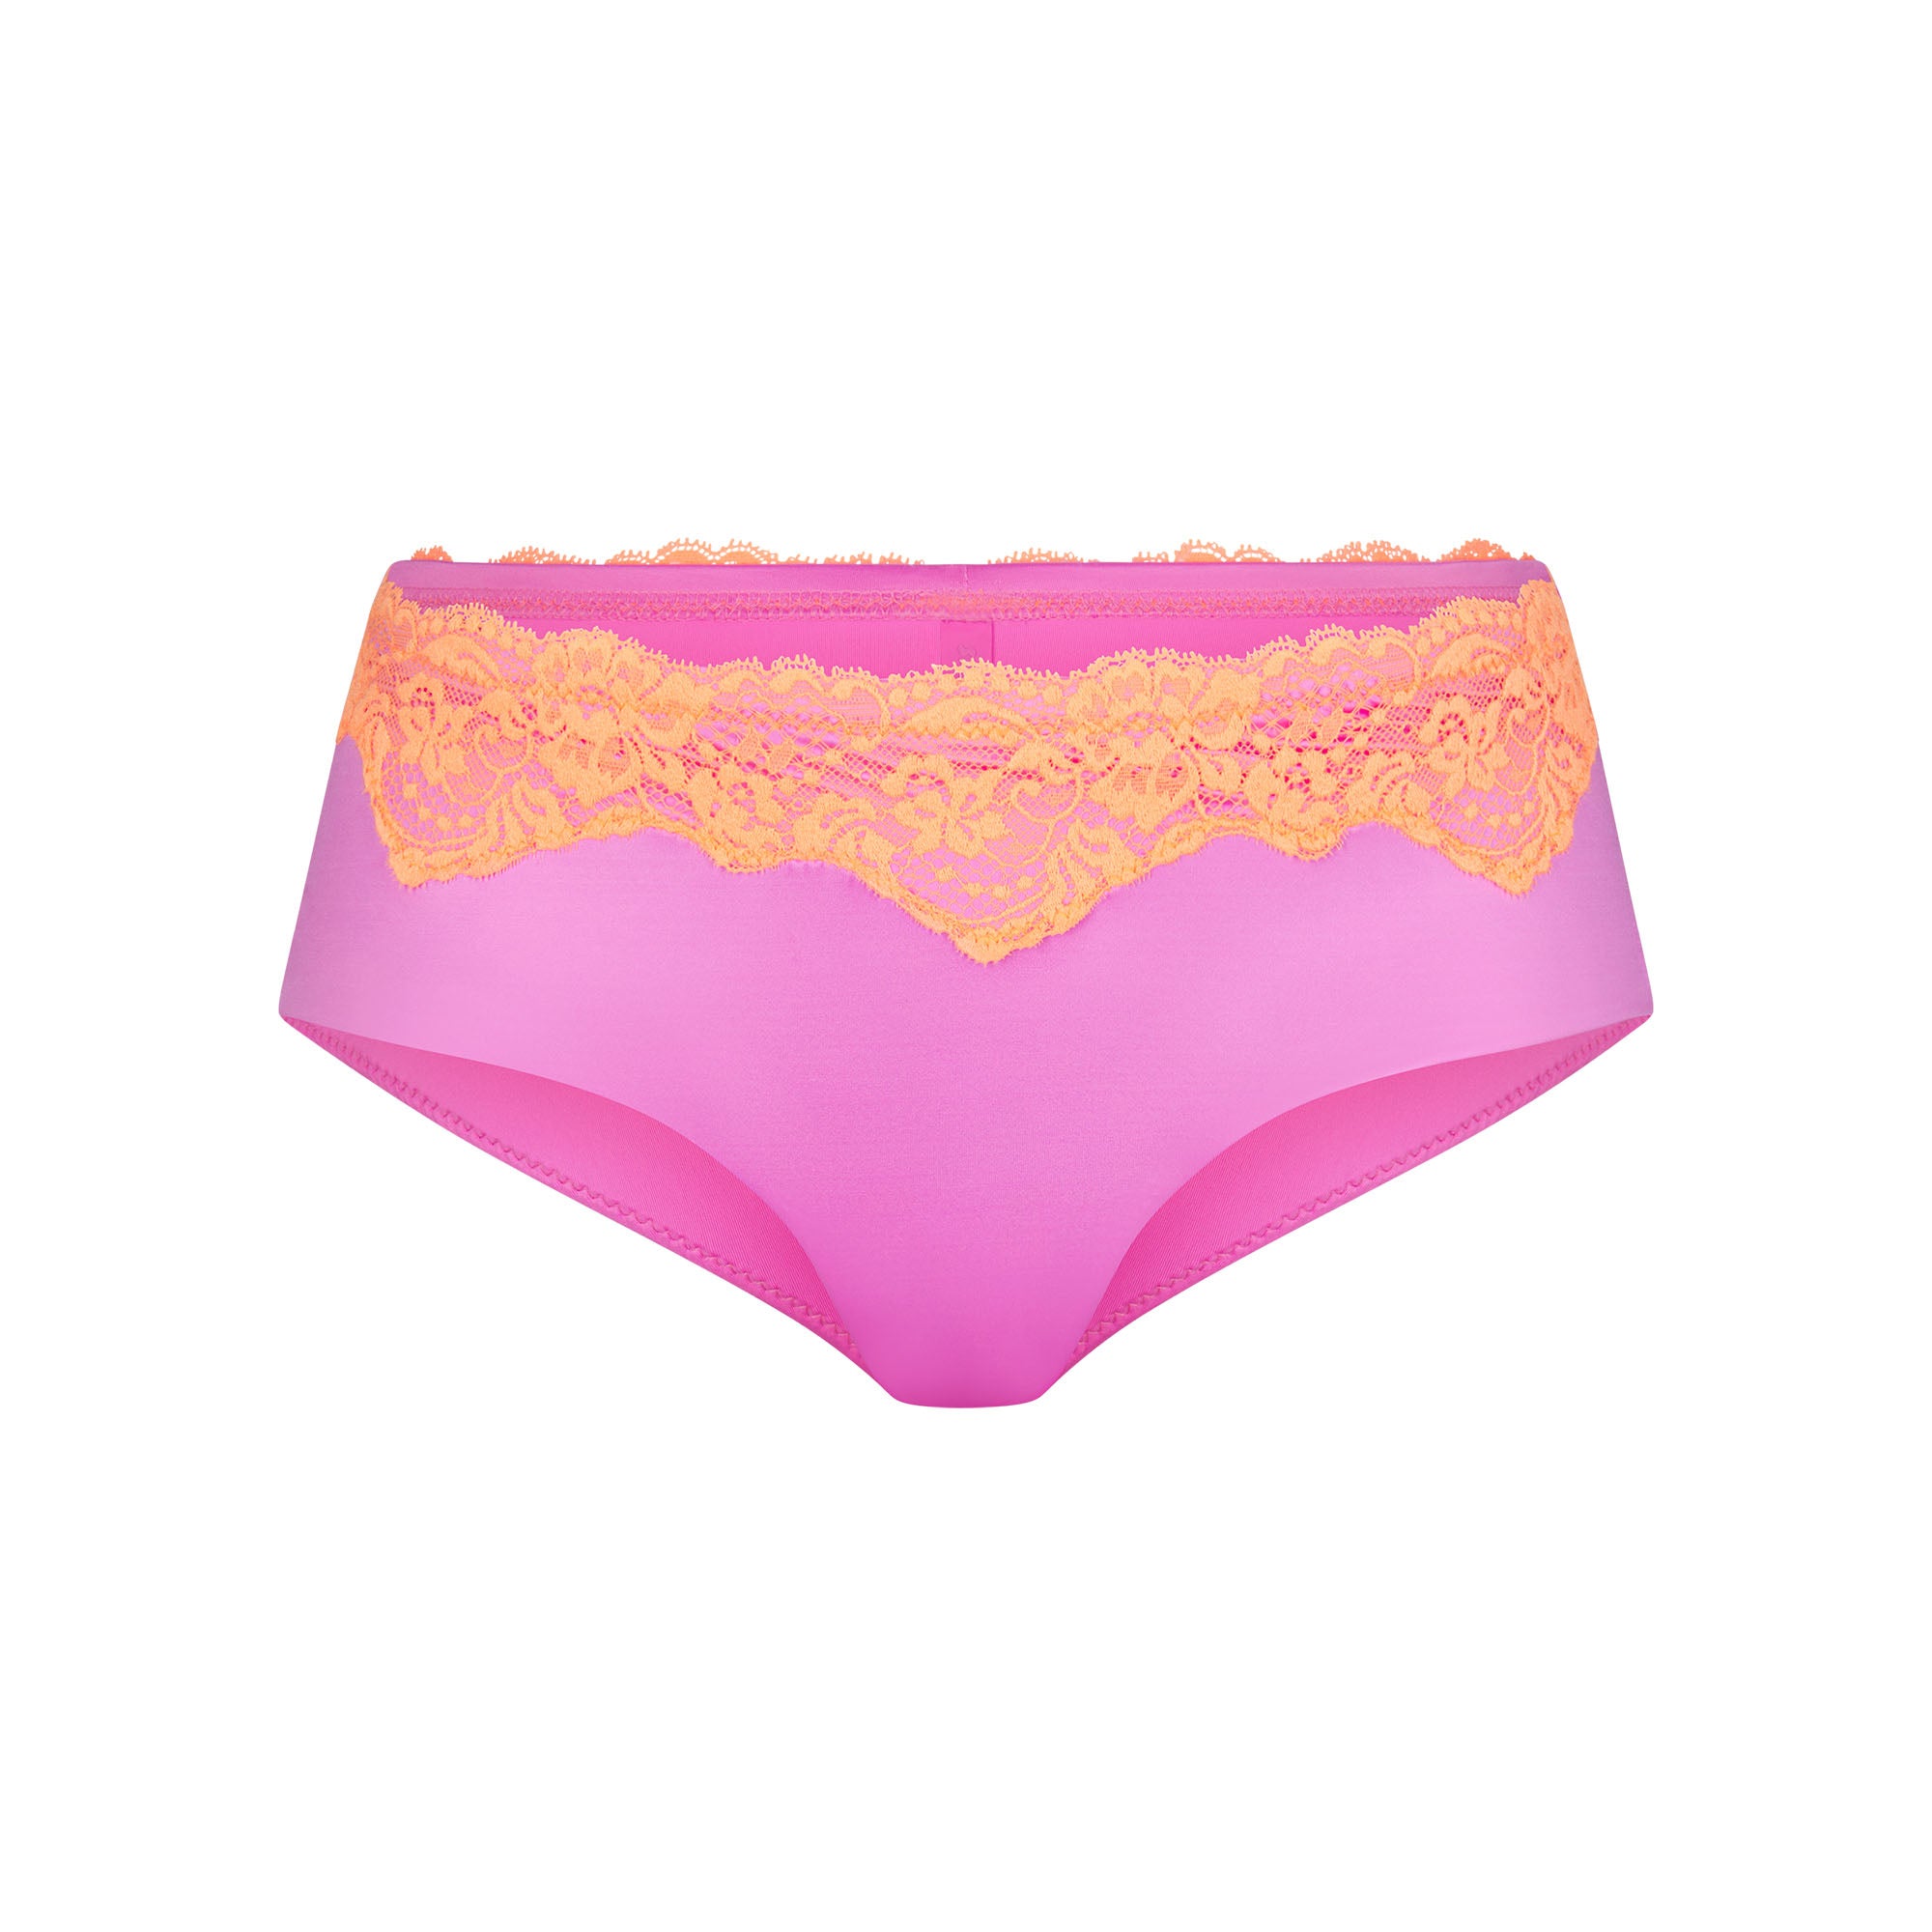 NWT~ SKIMS Kim K Thong / Color: Neon Orchid/ Size 3XL/ Style: (PN-DTH-2027)